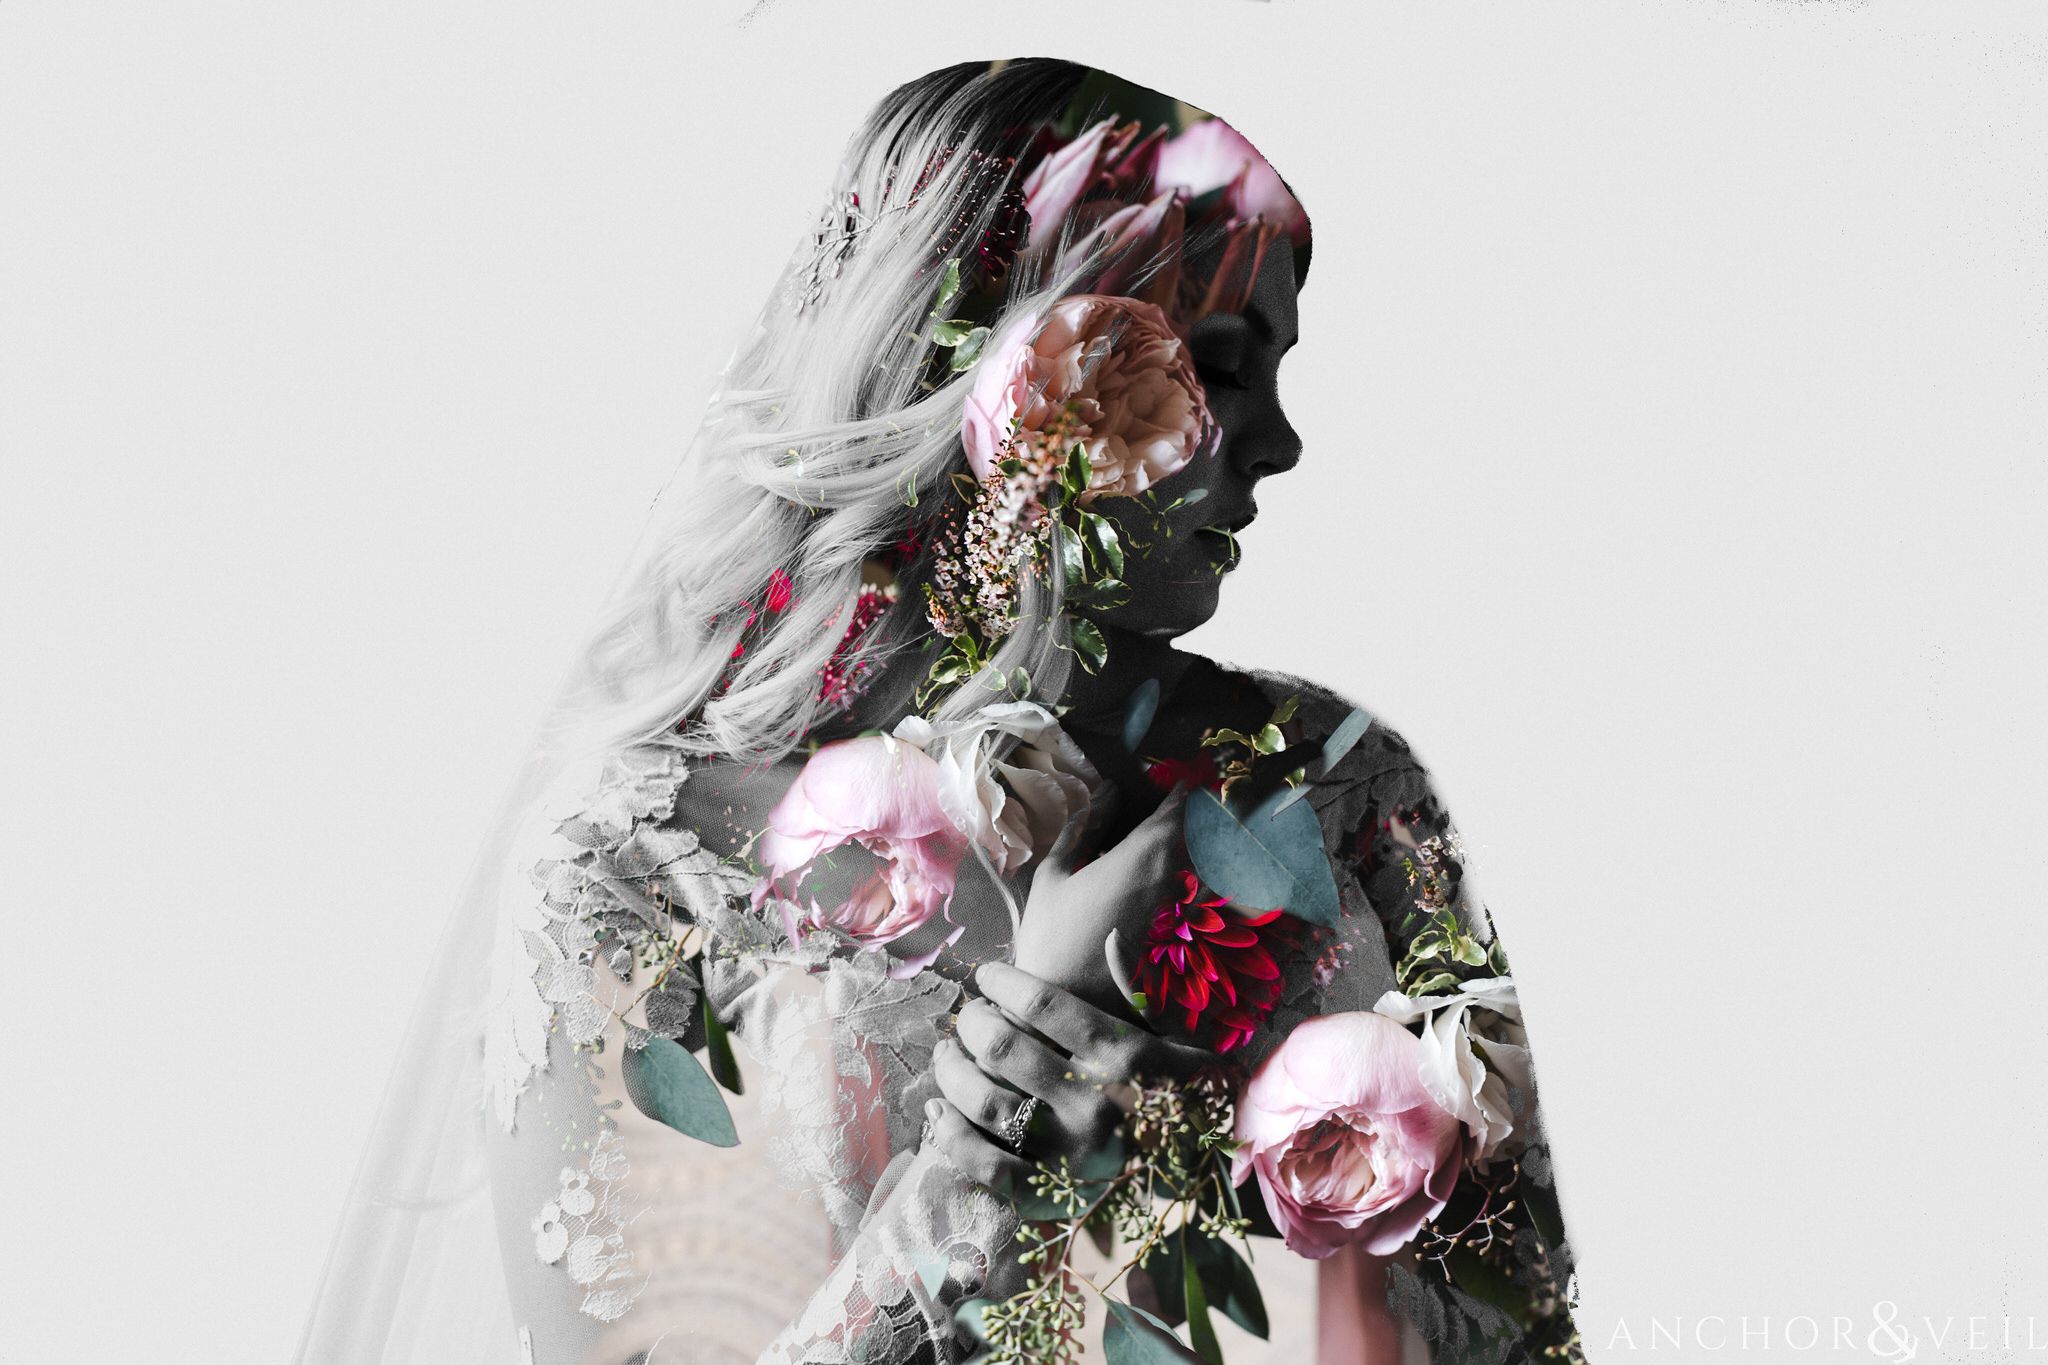 Unique Double Exposure with contrast light of the bride and the brides flowers